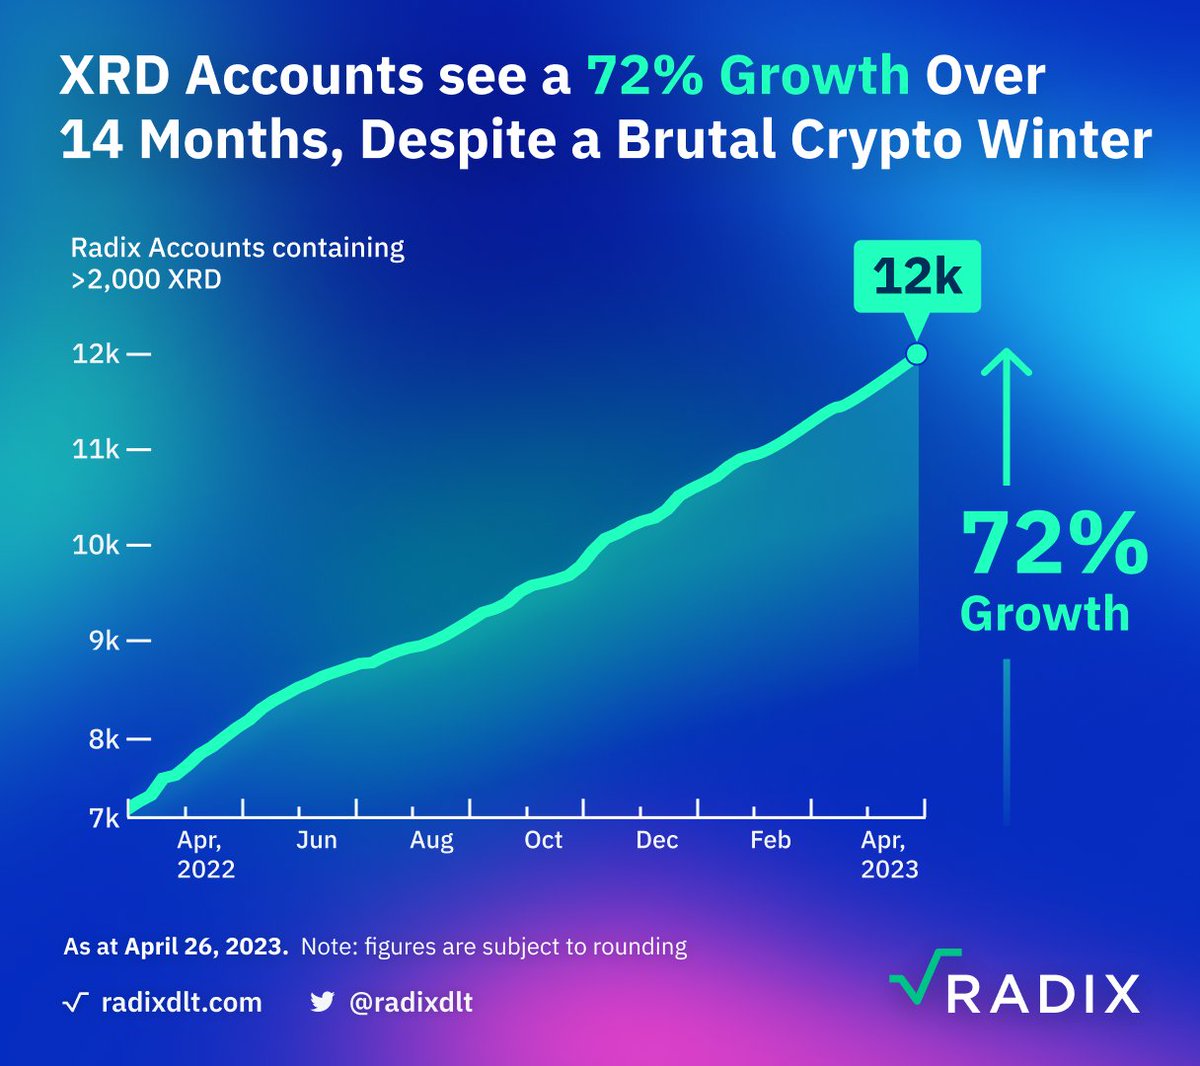 🚨 BREAKING: Babylon is just 70 days away! The growth experienced in the past 14 months is mind-blowing; are you ready to witness the full power of the #Radix tech stack post-Babylon? 👀